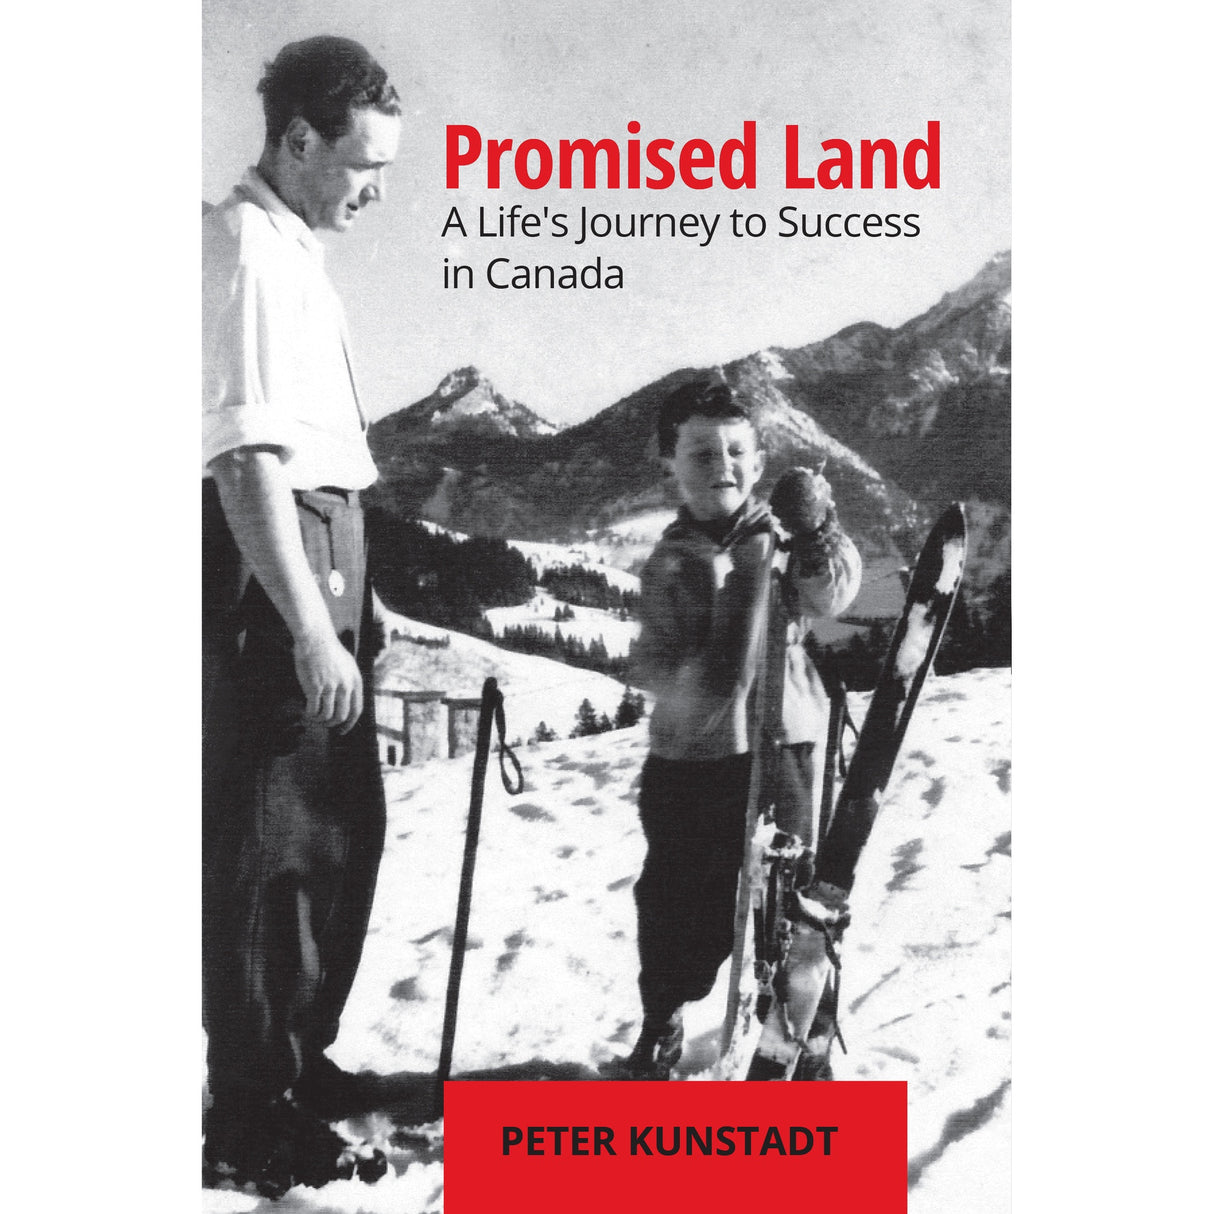 Promised Land - A Life's Journey to Success in Canada